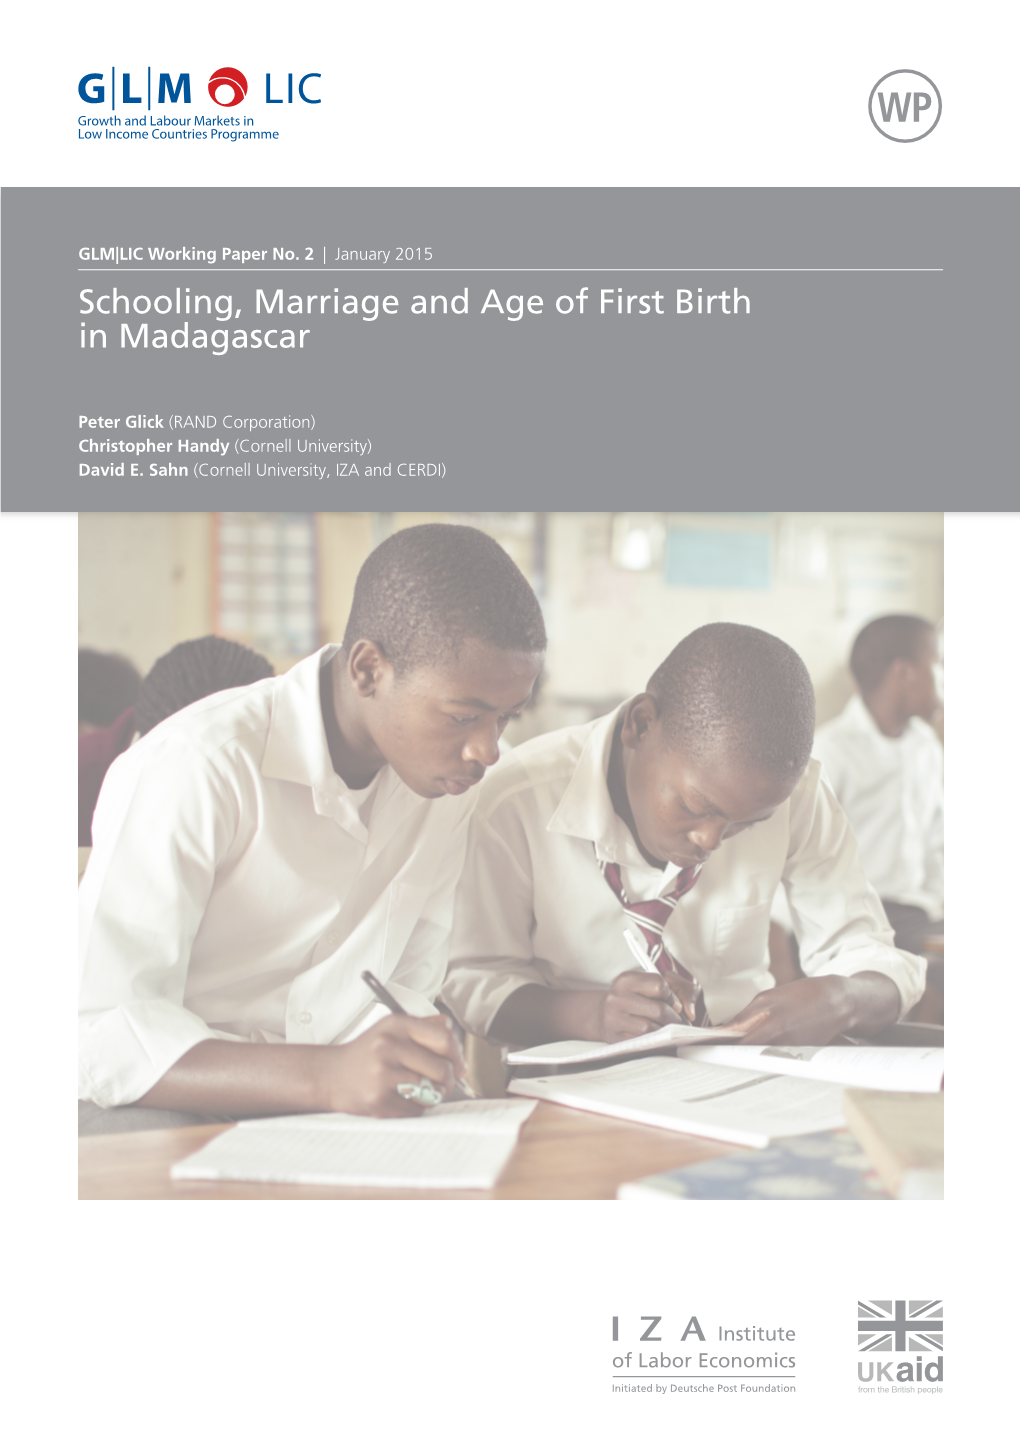 Schooling, Marriage and Age of First Birth in Madagascar